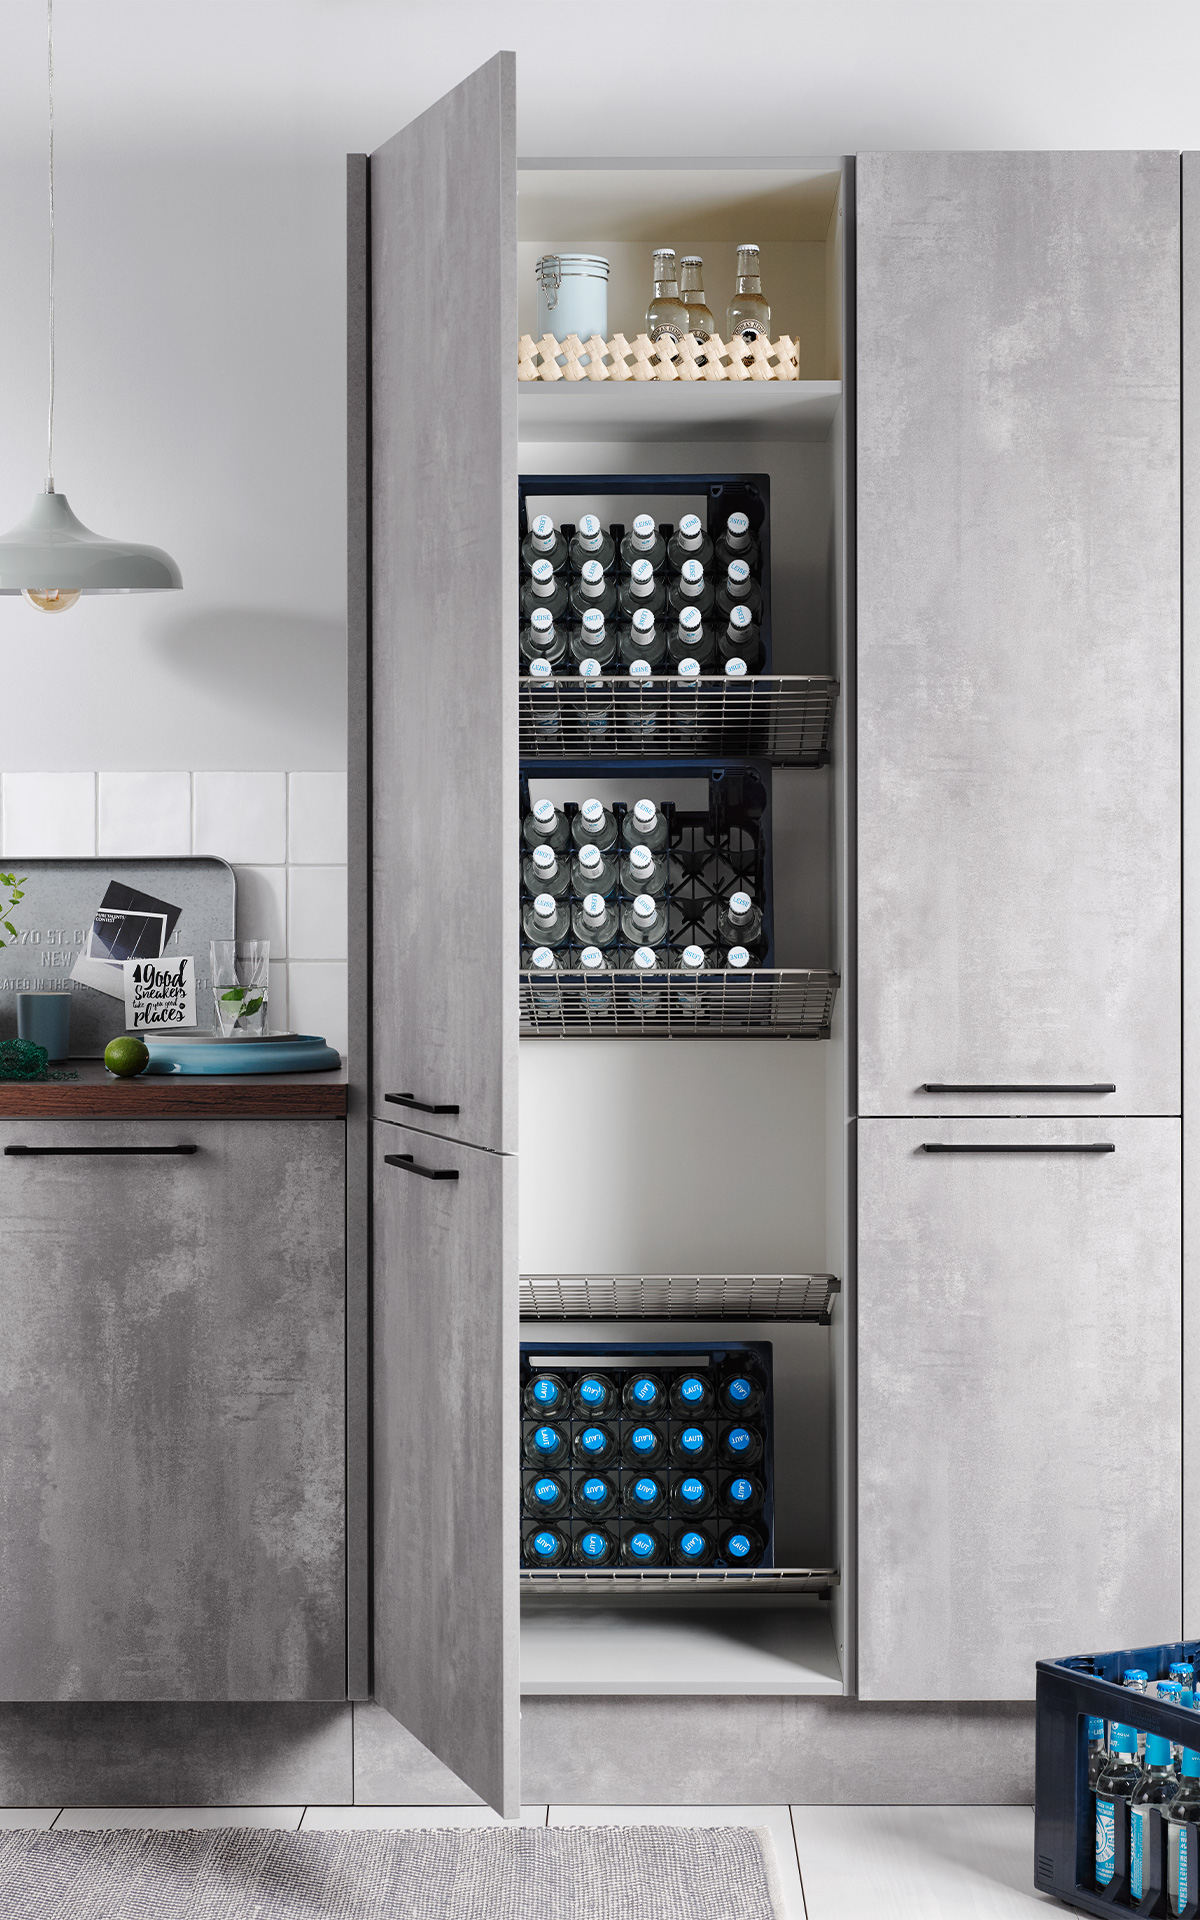 kitchen miracle Your a your spatial organisation becomes kitchen. Interior for smart with organisation from new Häcker